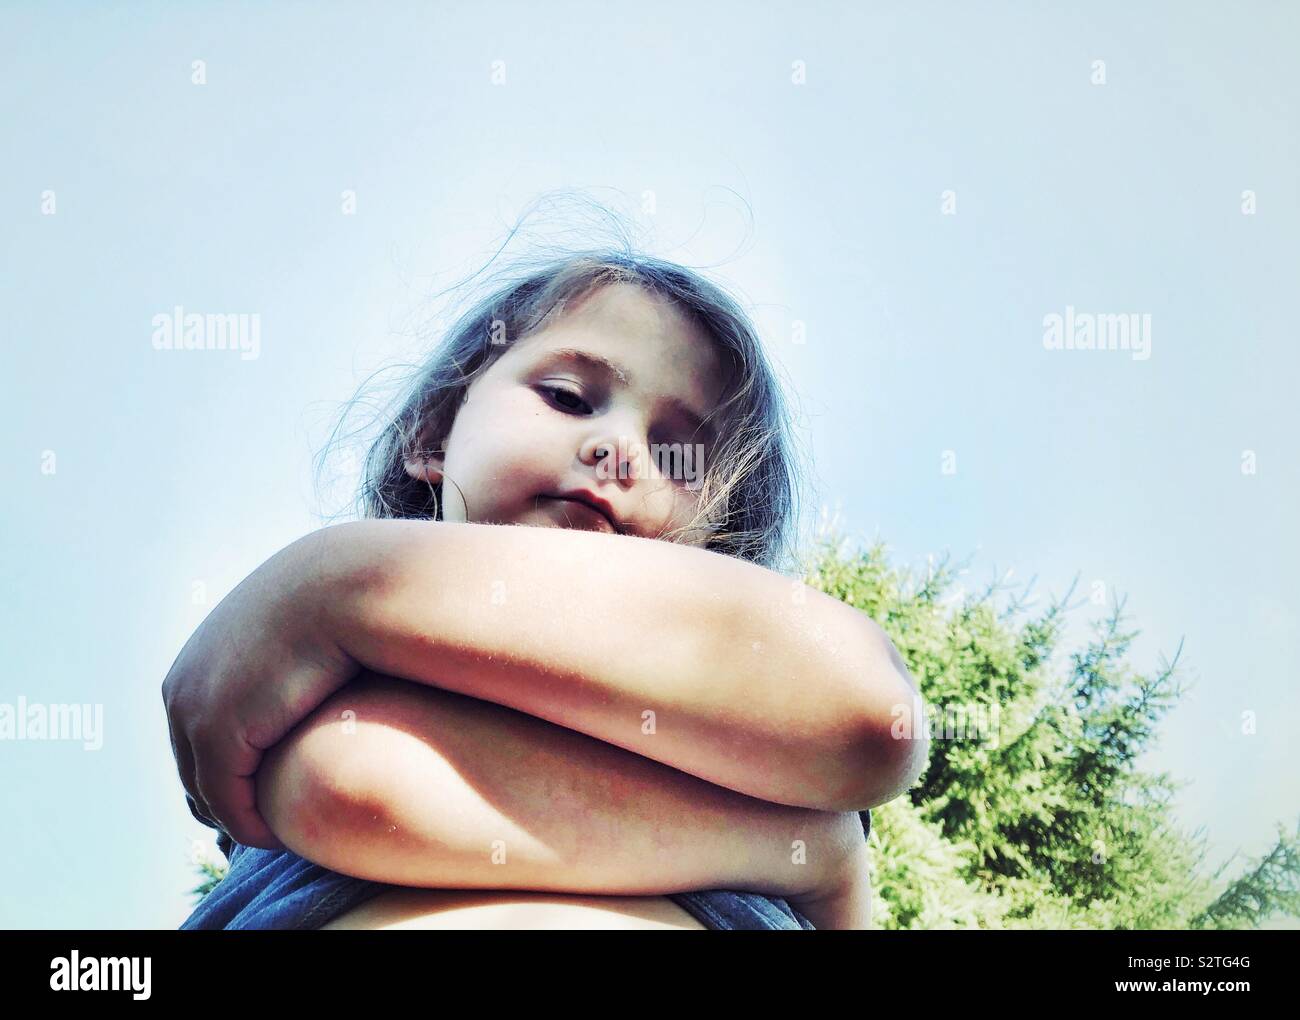 Looking up at young girl with crossed arms and disapproving expression Stock Photo